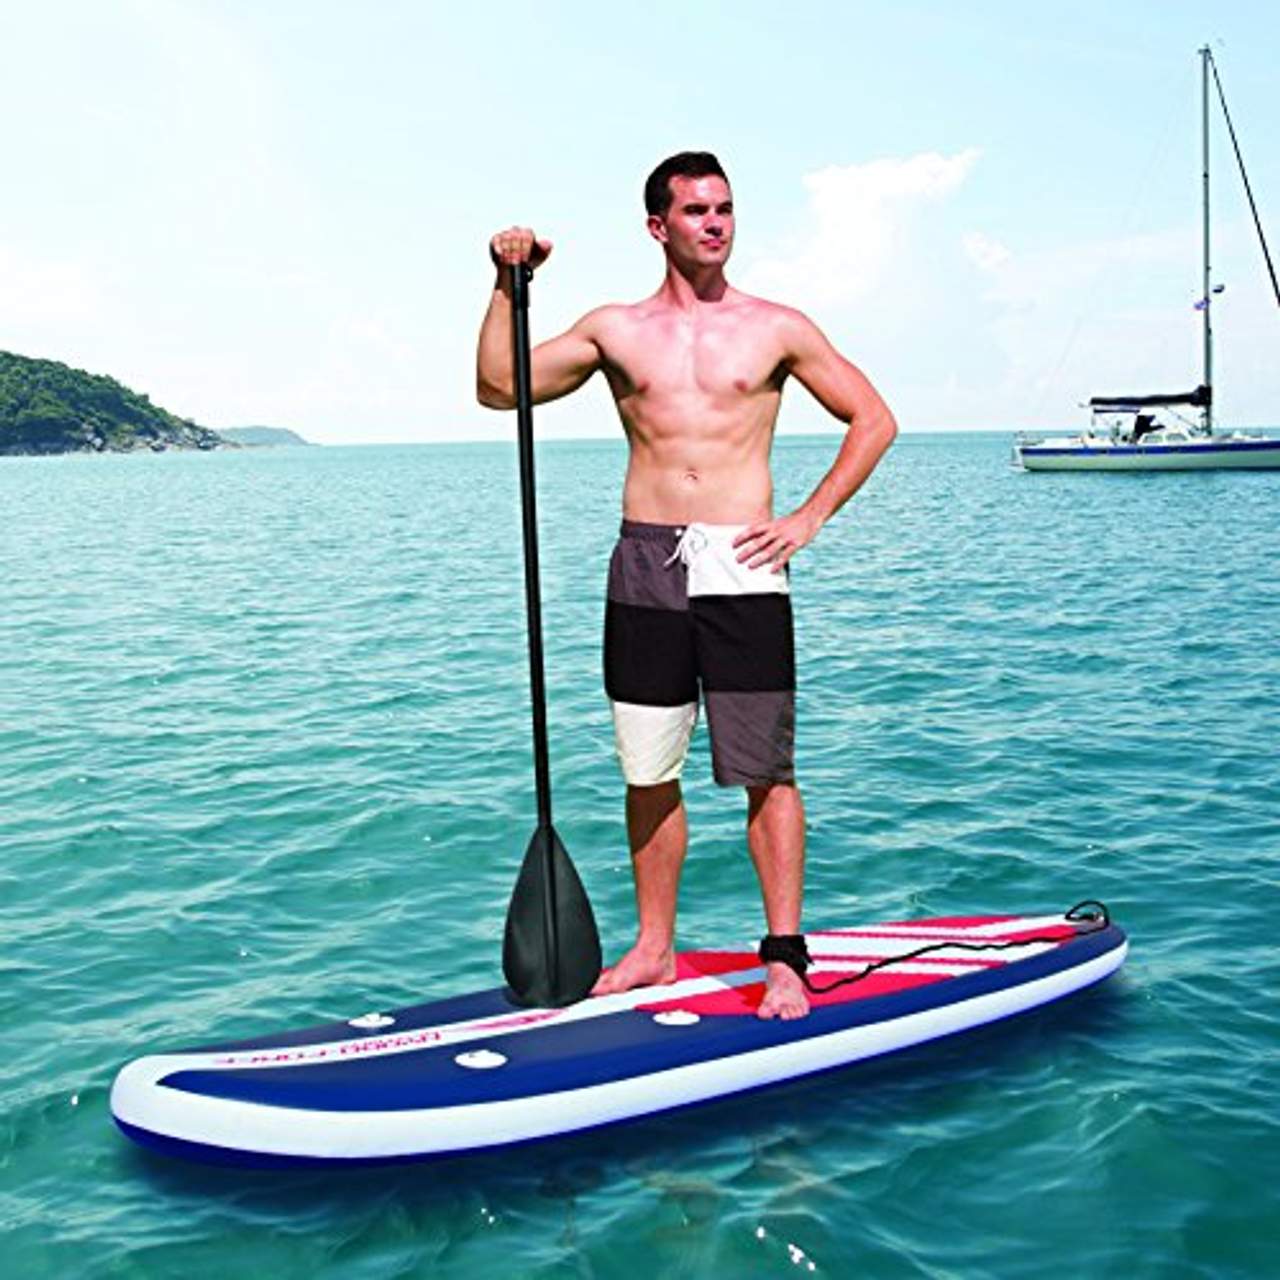 Bestway Long Tail aufblasbares Stand Up Paddle Board